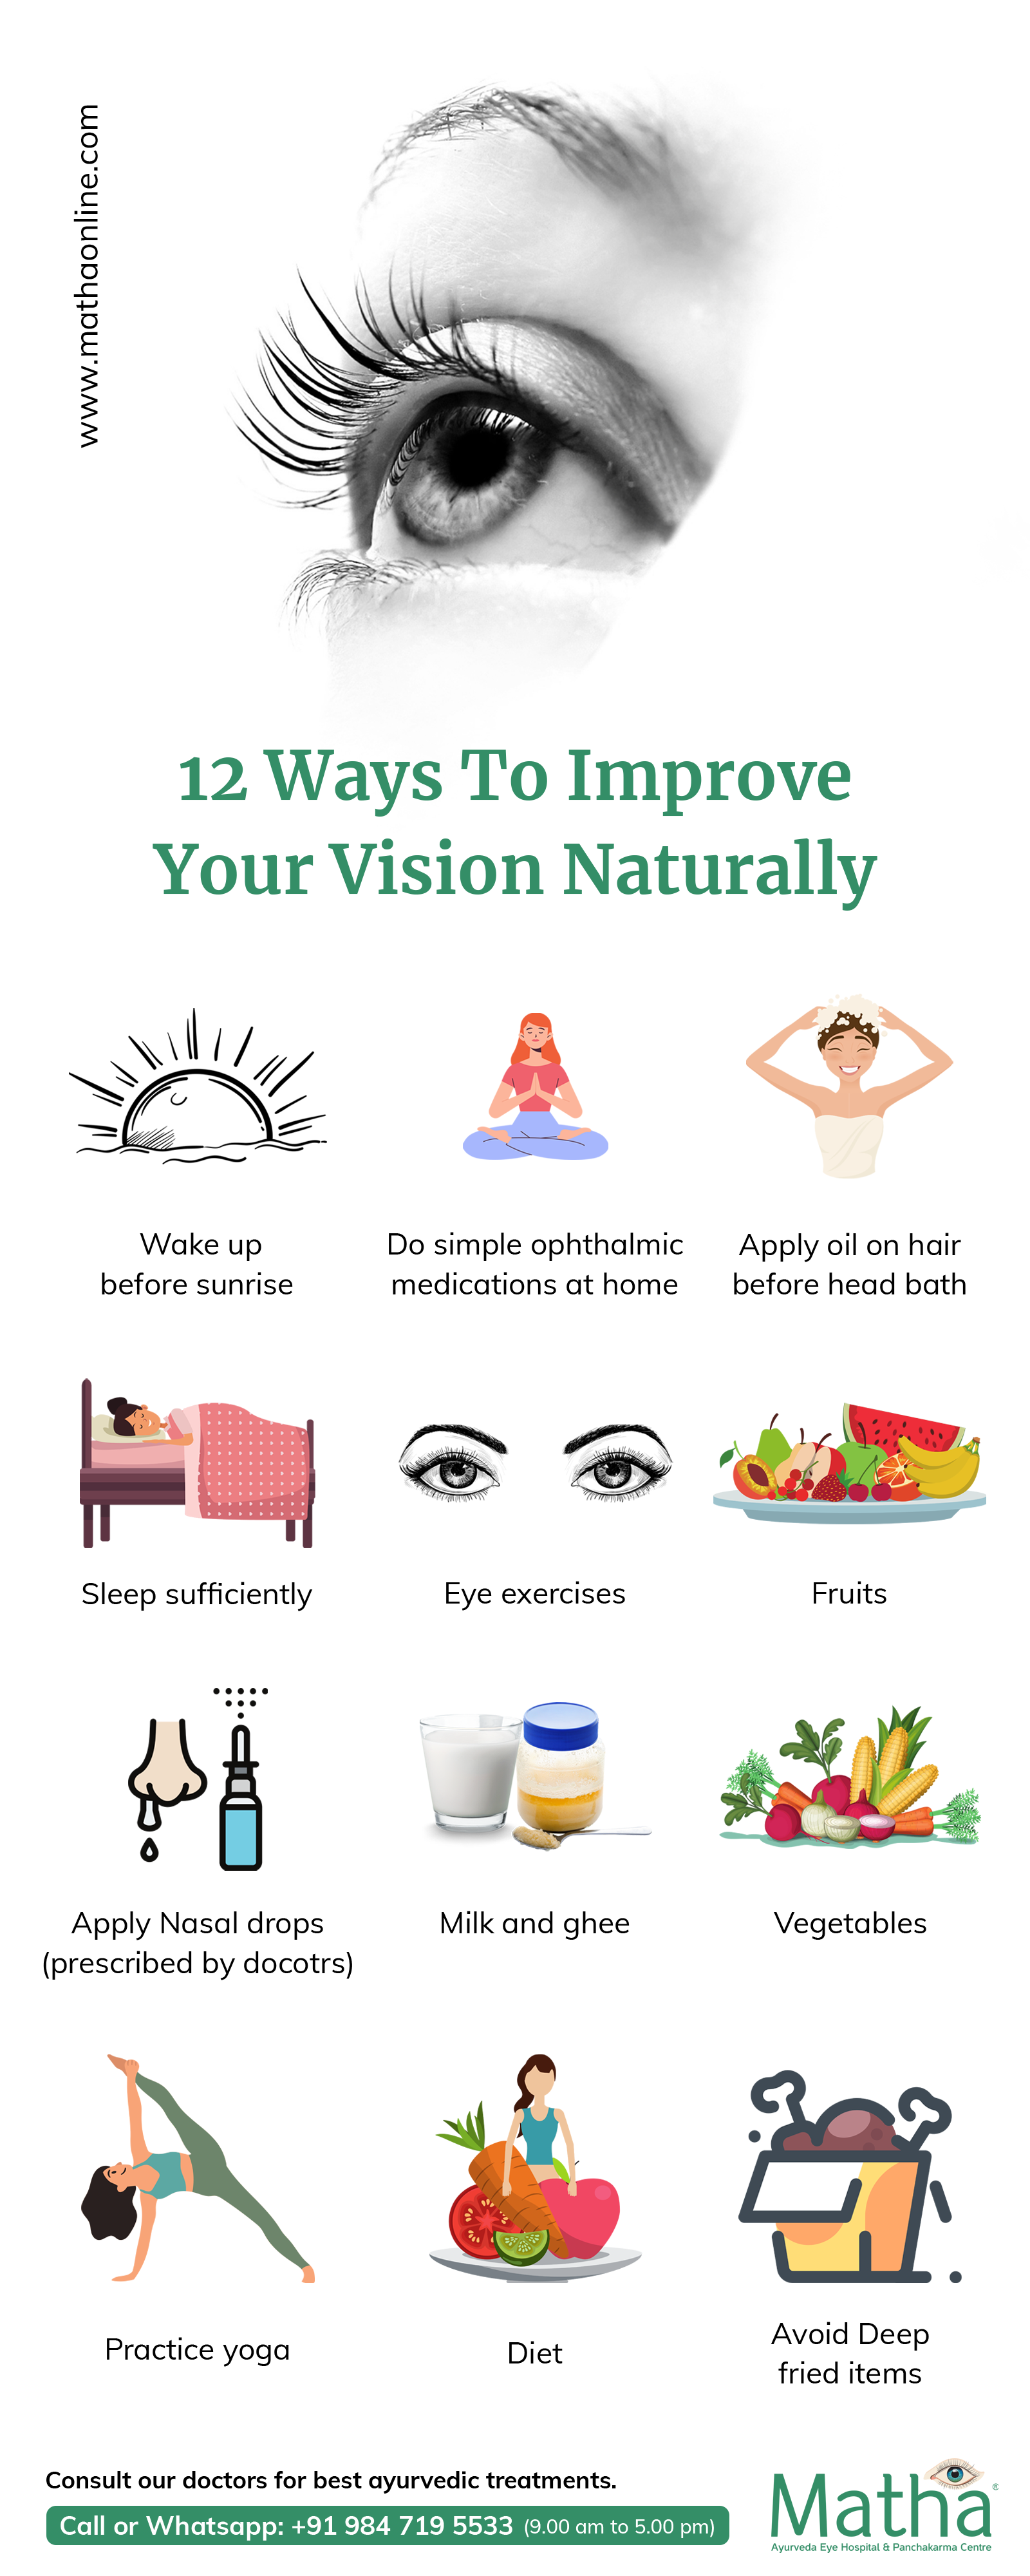 12 ways to improve your vision naturally